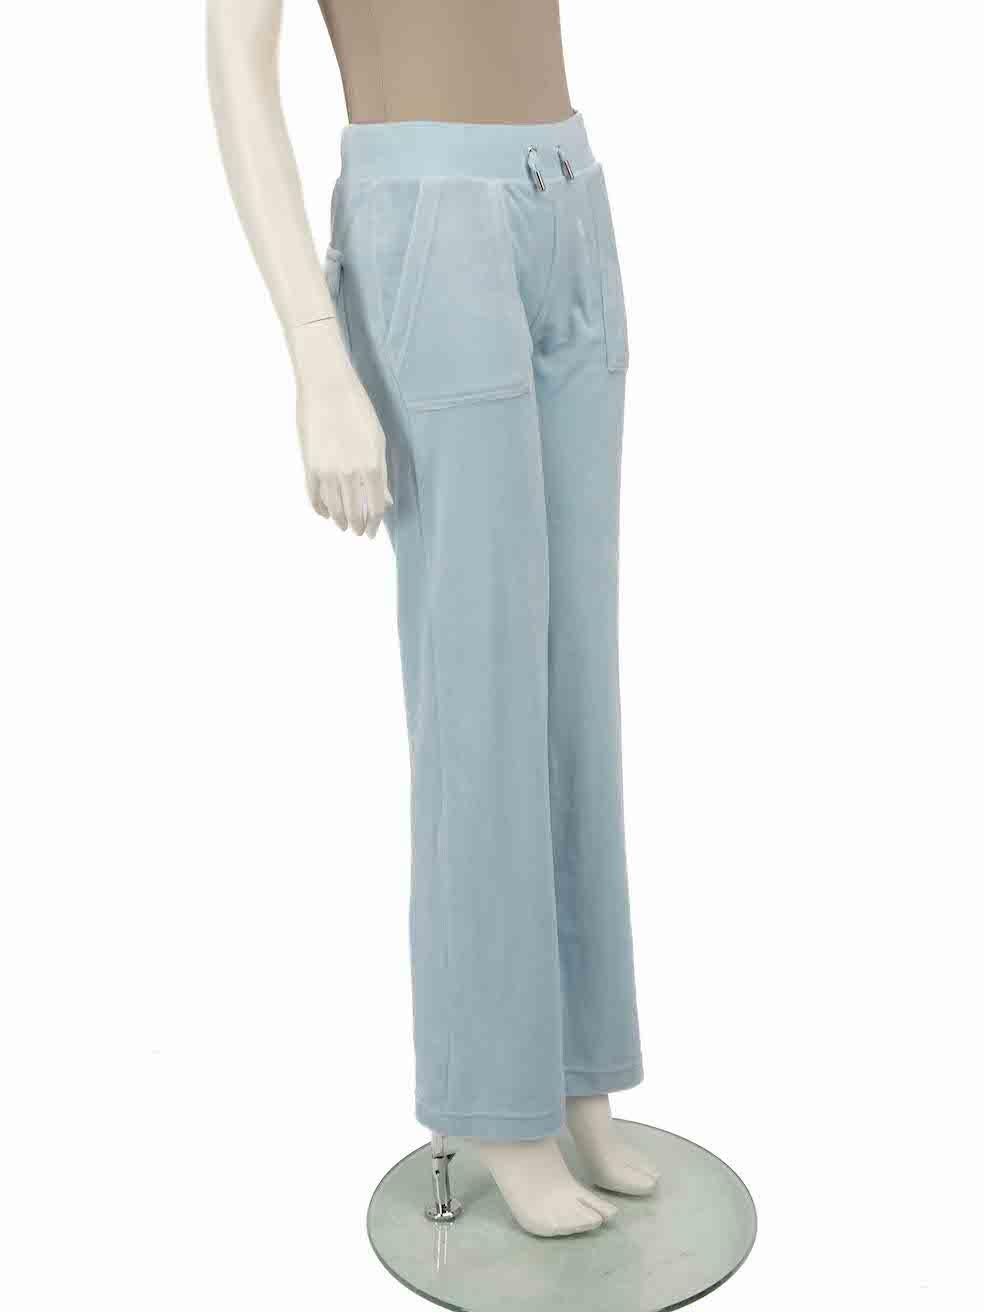 CONDITION is Never worn, with tags. No visible wear to trousers is evident on this new Juicy Couture designer resale item.
 
 
 
 Details
 
 
 Blue
 
 Velour
 
 Tracksuit trousers
 
 Mid rise
 
 Straight leg
 
 Elasticated drawstring waistband
 
 2x